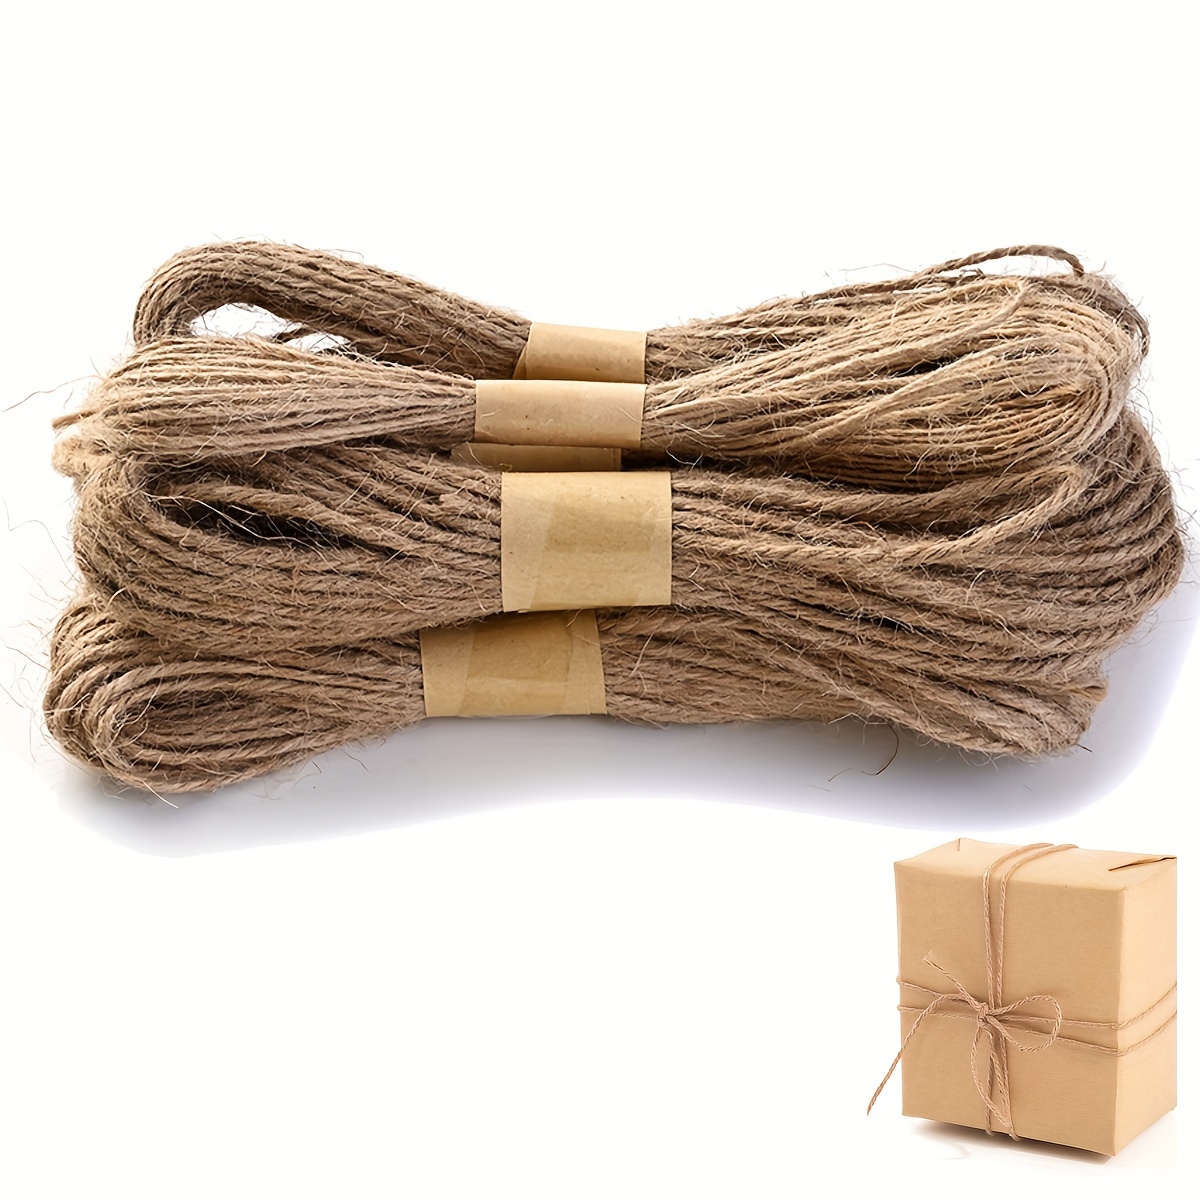 50M Natural Twine Cord Jute Twine Rope DIY Decor Twine Jute String  Gardening Cord Craft Gift Packing Strings Party Supplies